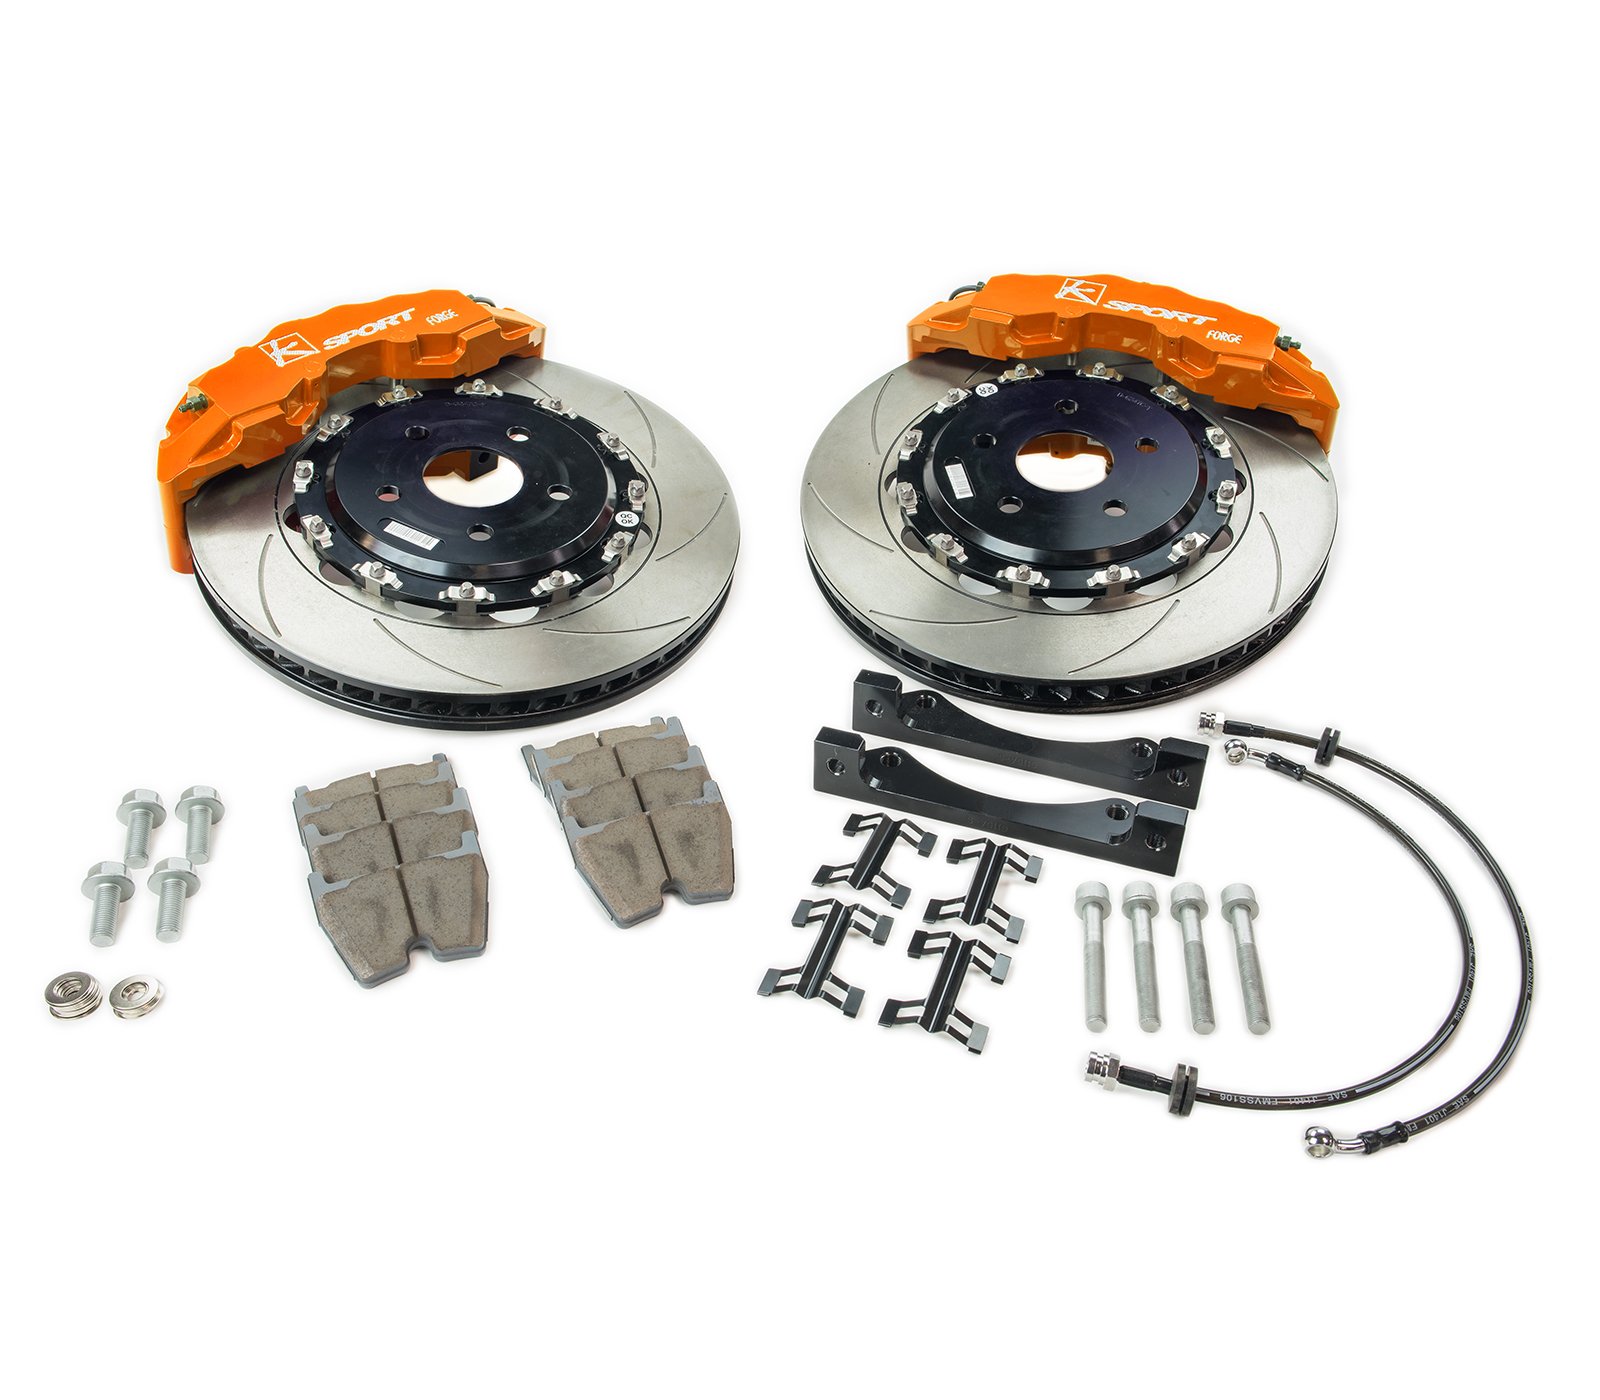 Air mail Deadlock Good luck 09-15 Audi A4 - Front 8 Piston Big Brake Kit w/ 15.7 in. Slotted Rotors -  Supercomp